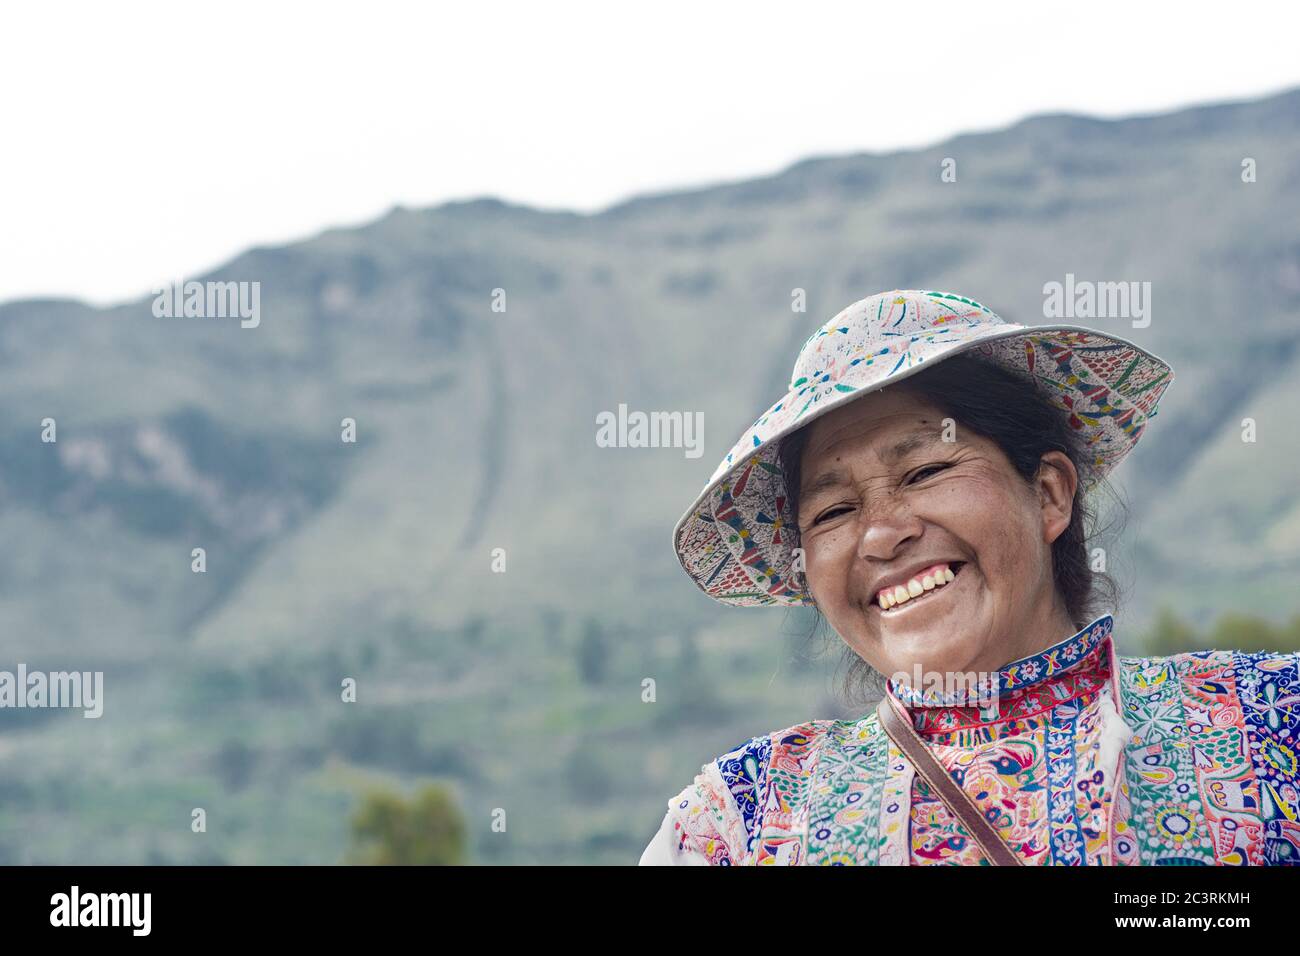 YANQUE, COLCA VALLEY, PERU - JANUARY 20, 2018: Portrait of unidentified Peruvian native woman with tradicional clothes laughing  in the traditional Co Stock Photo